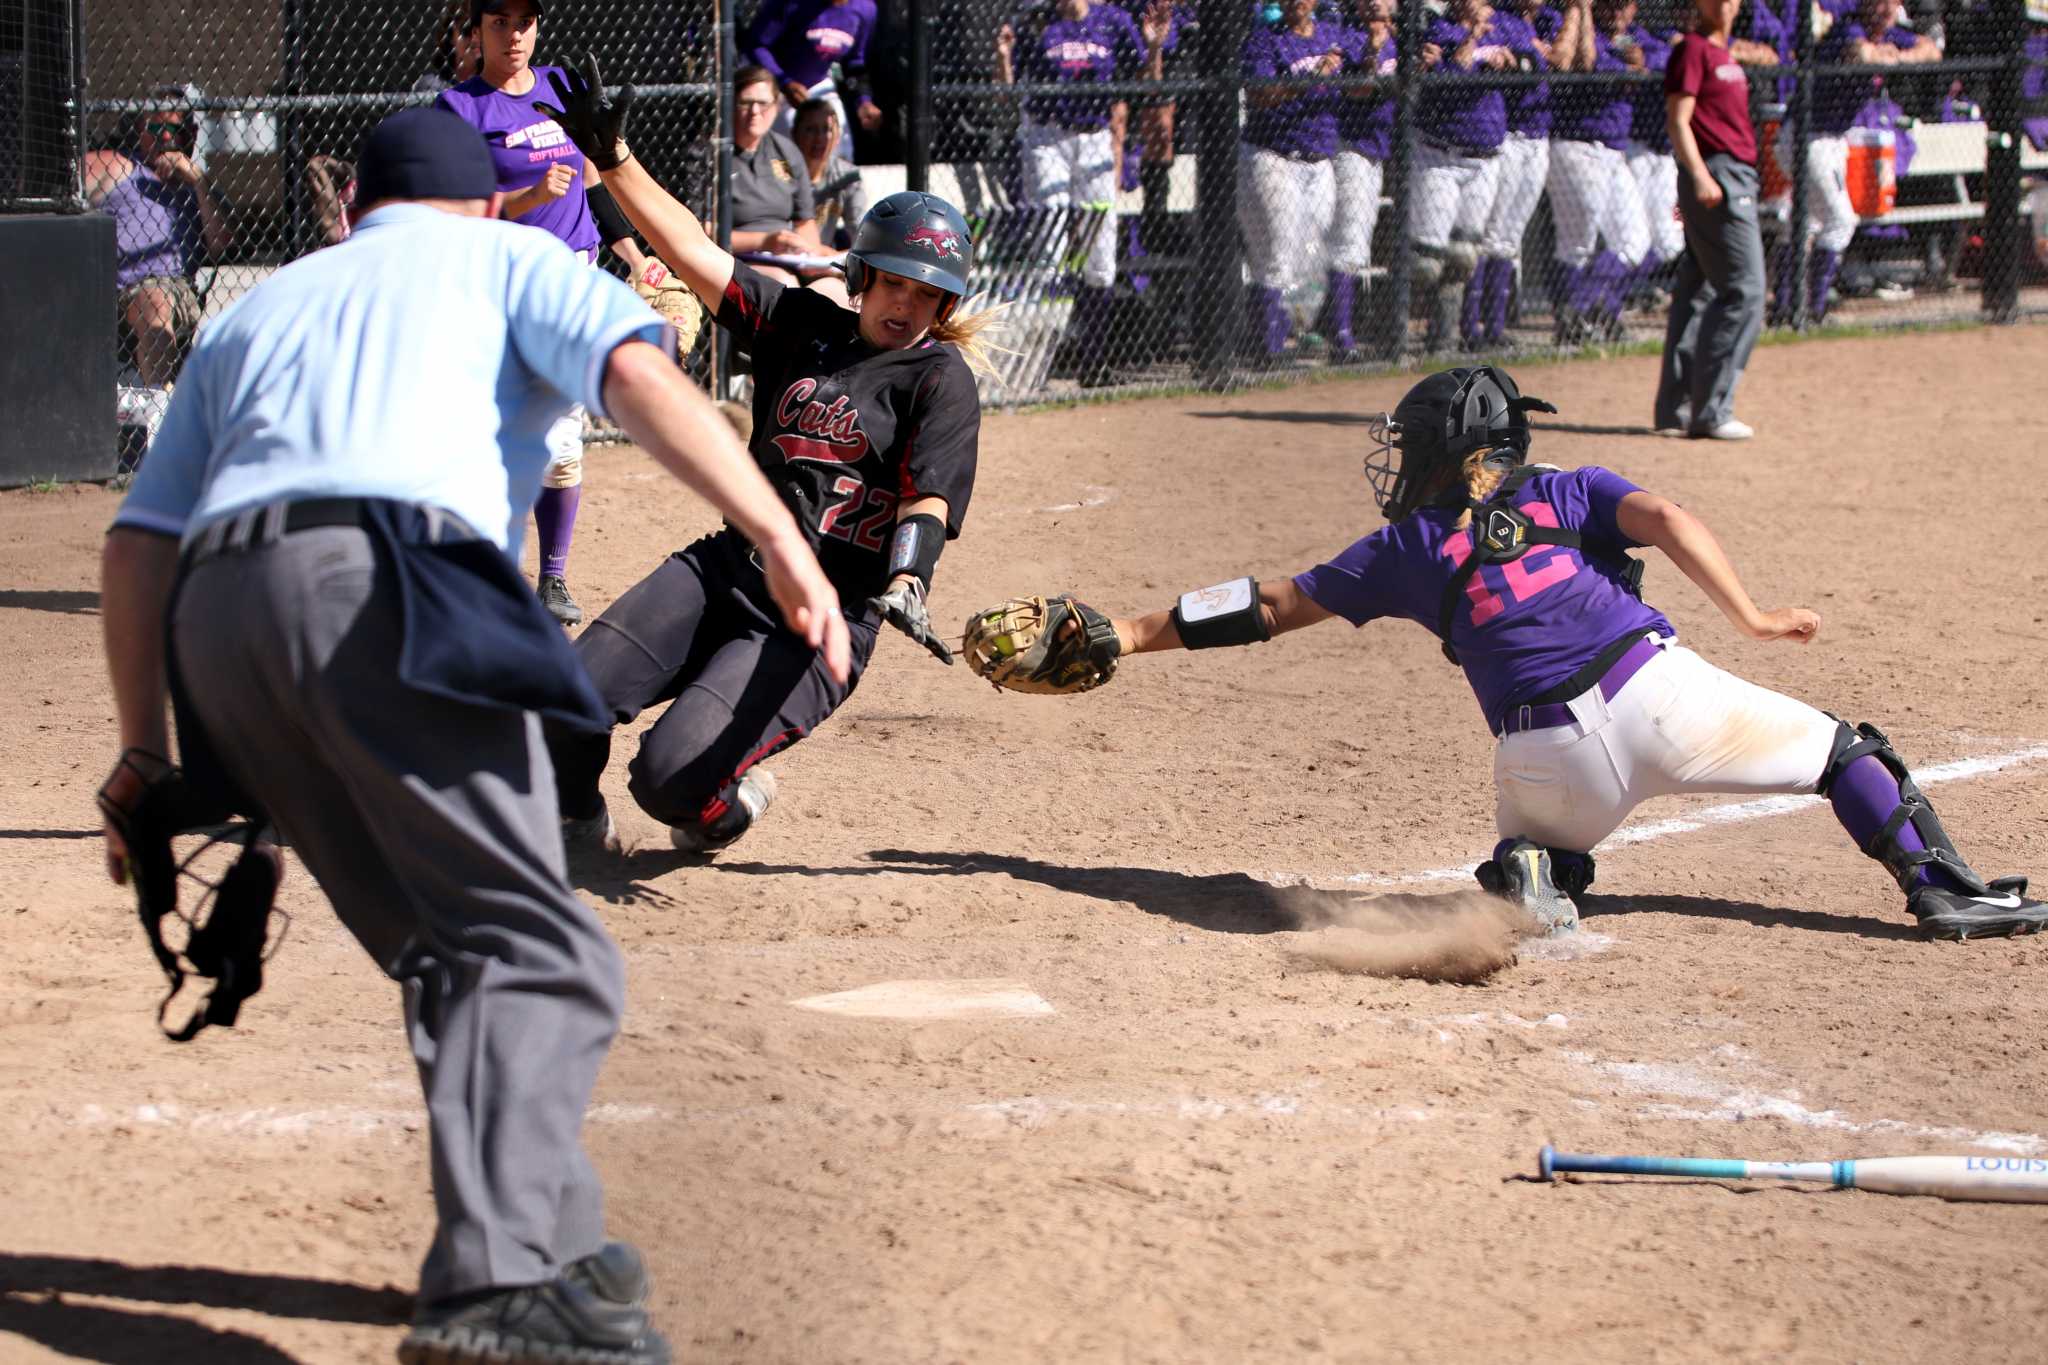 SF state Junior, C, Celeste Adriano (12), tags out Junior Chico State Wildcat, Claire Wayne (22) at home play at SF State on March. 13, 2017. (Kyler Knox/Xpress)